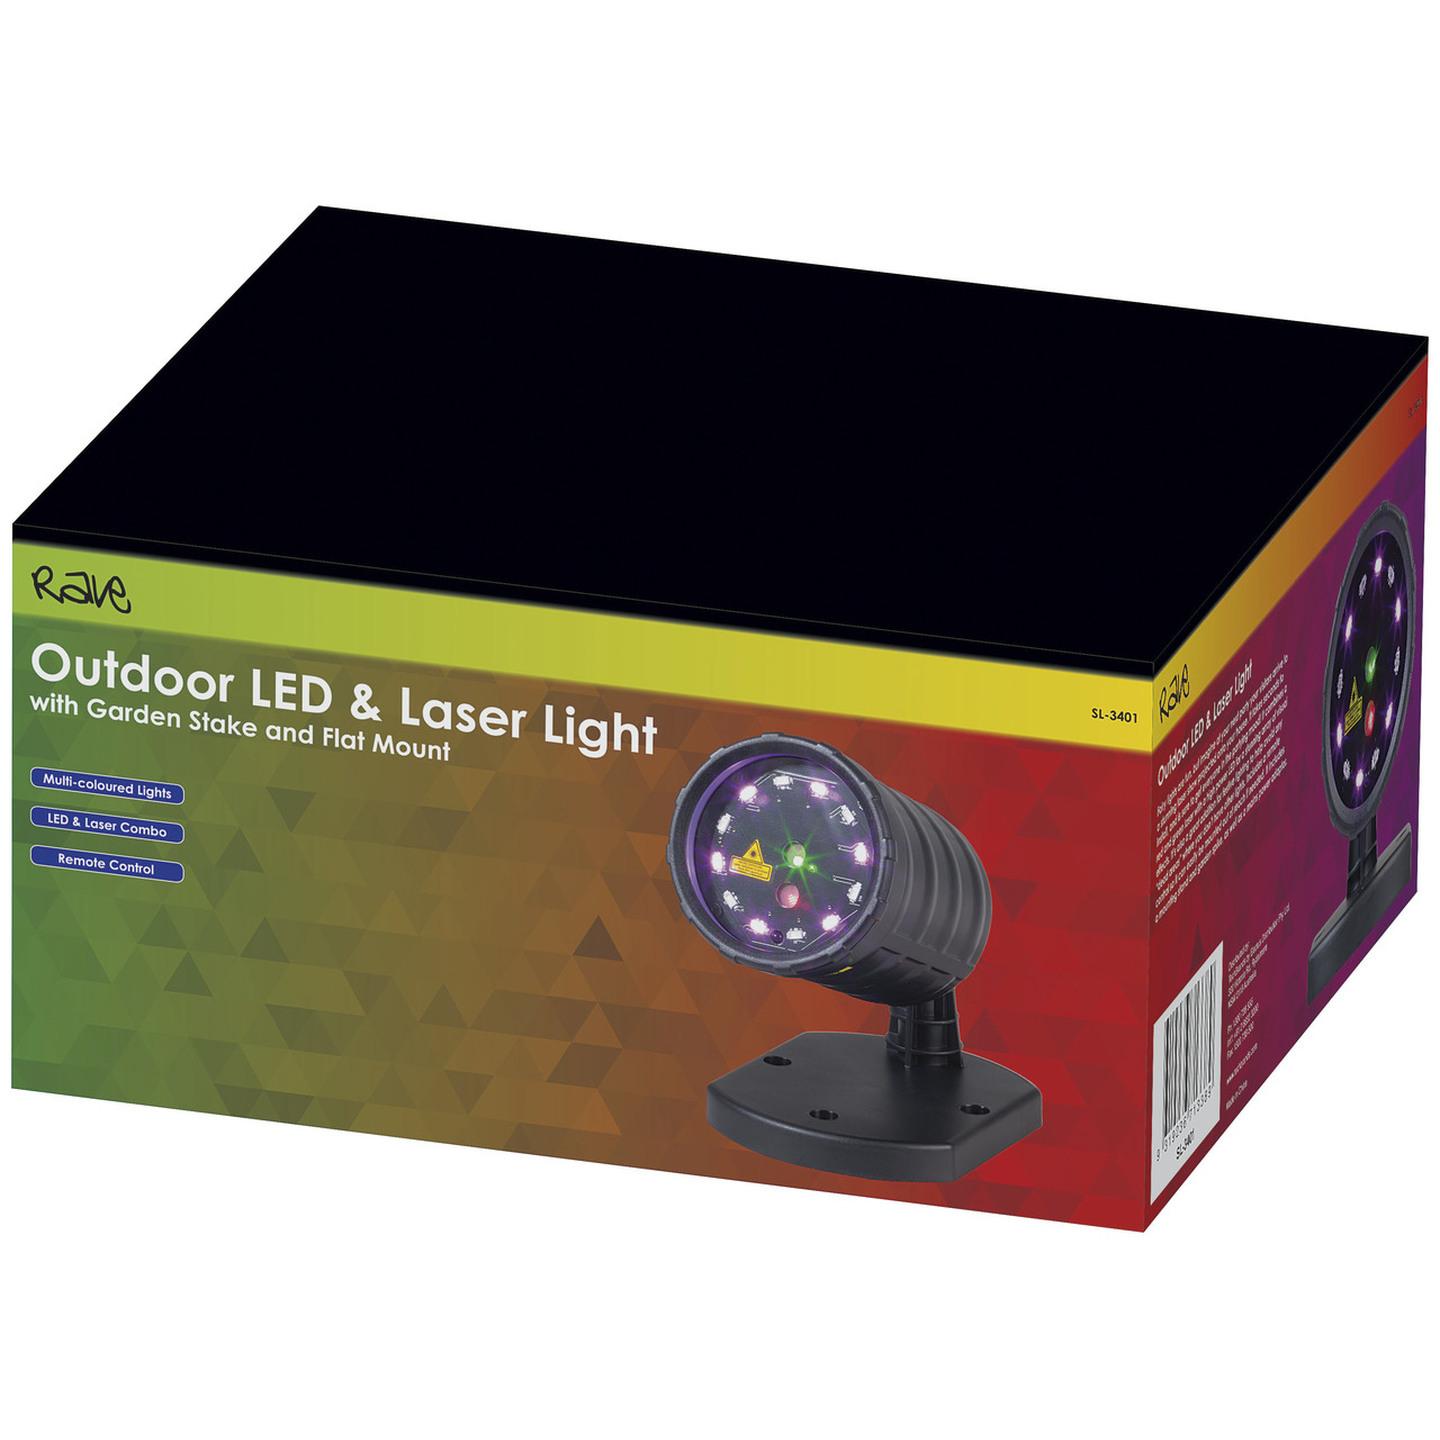 Outdoor LED and Laser Light